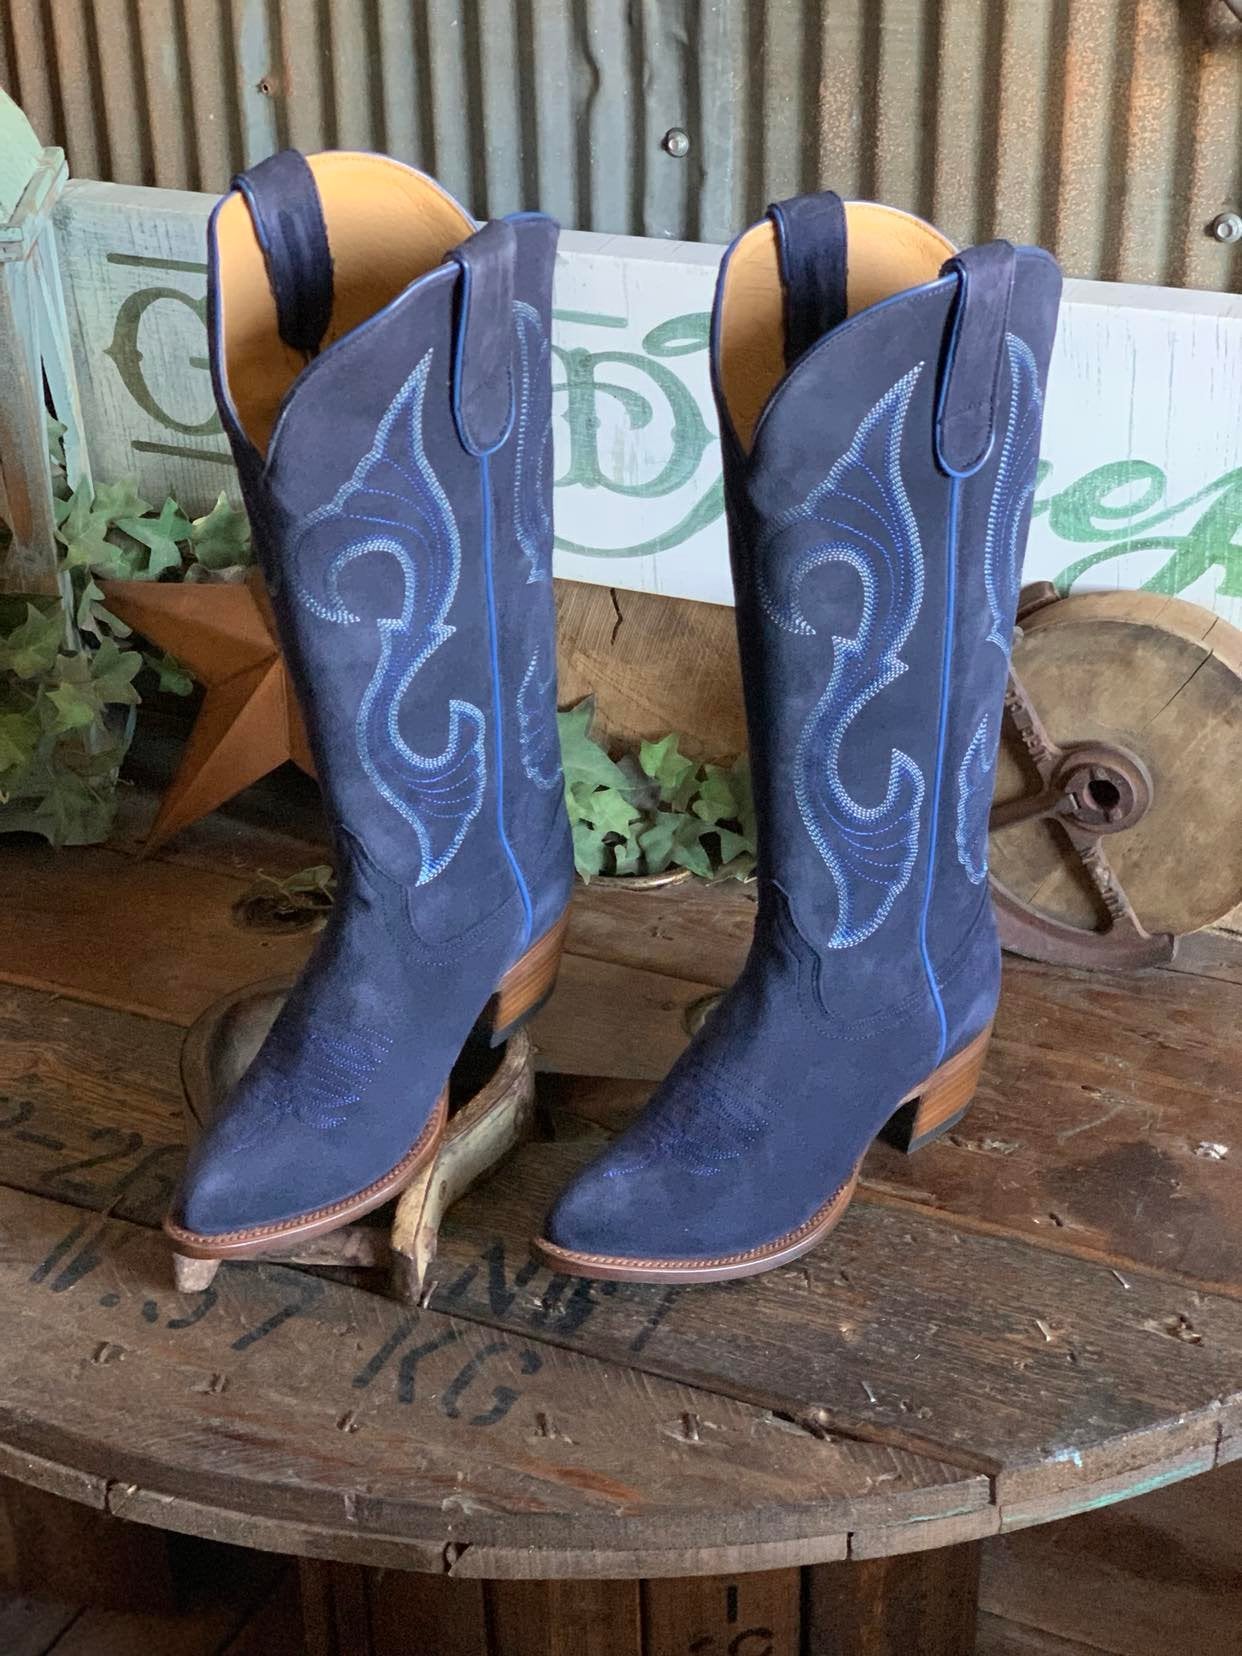 Macie Bean Marine Blue Suede Tall Boots-Women's Boots-Macie Bean-Lucky J Boots & More, Women's, Men's, & Kids Western Store Located in Carthage, MO